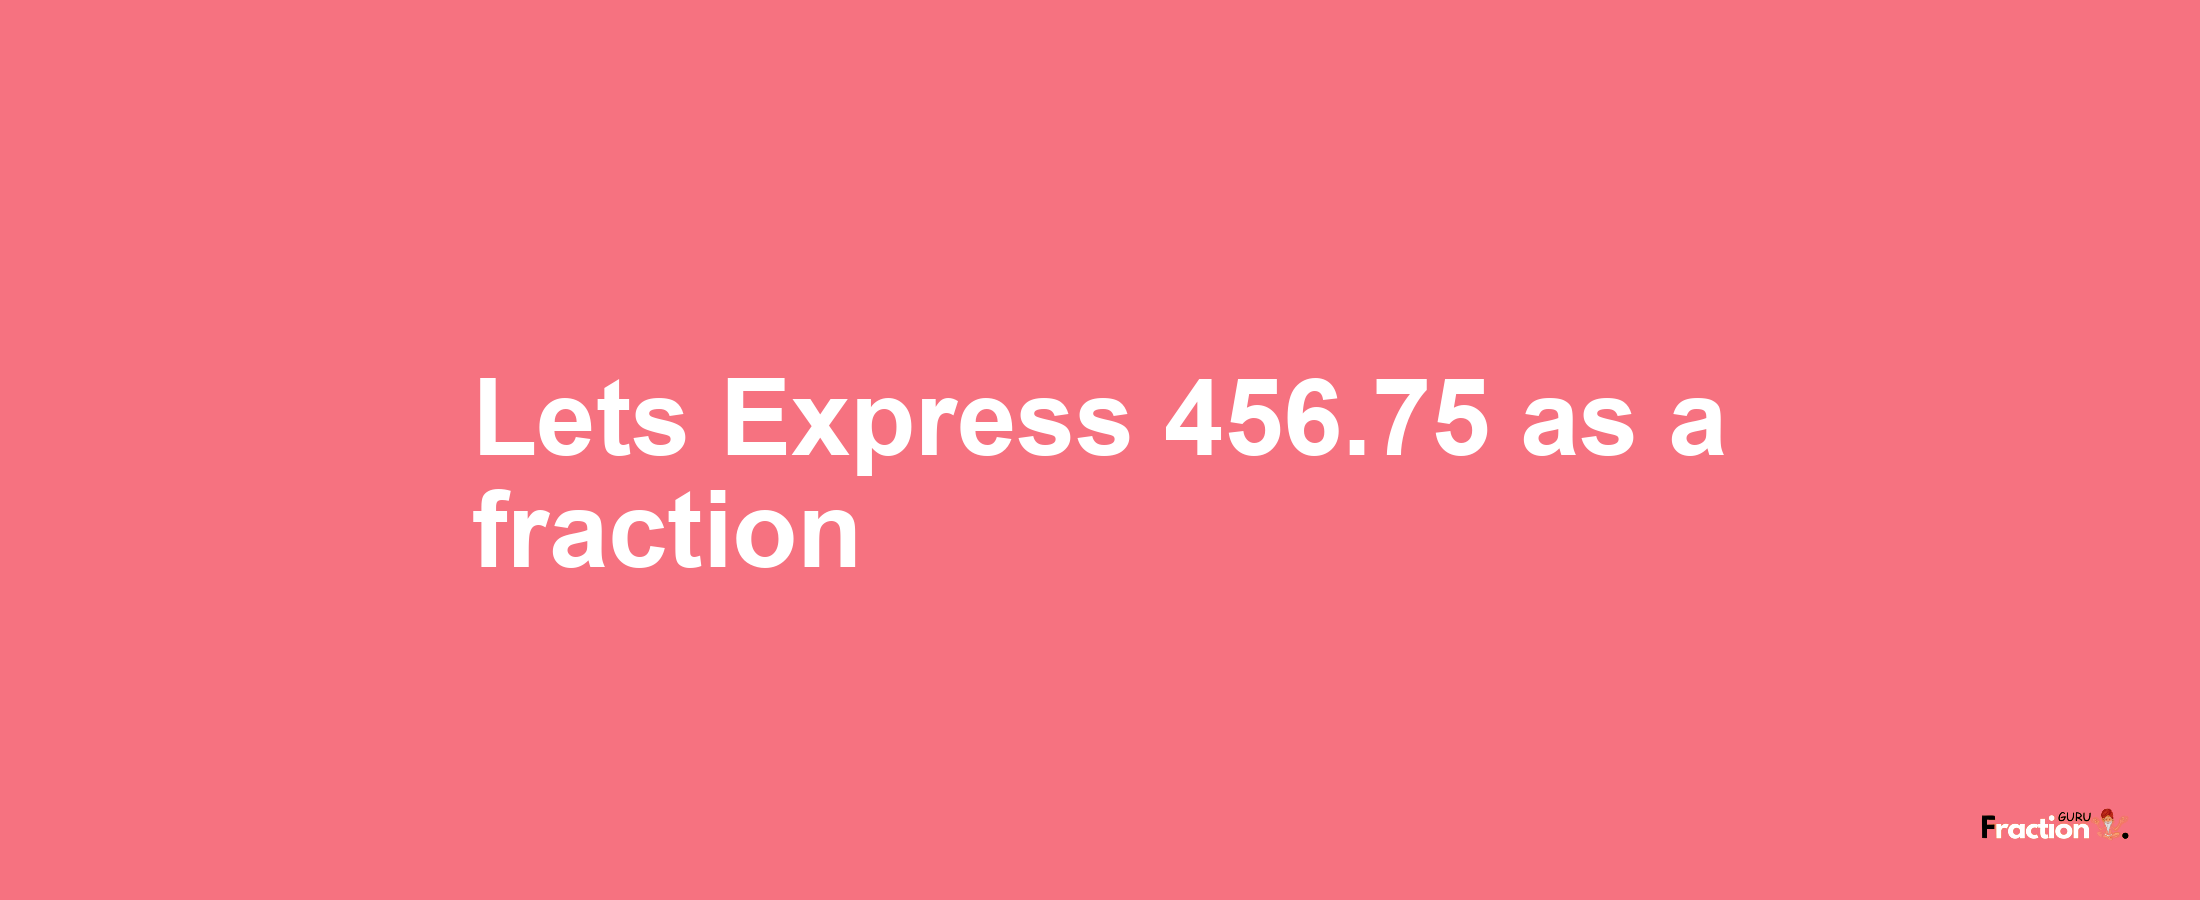 Lets Express 456.75 as afraction